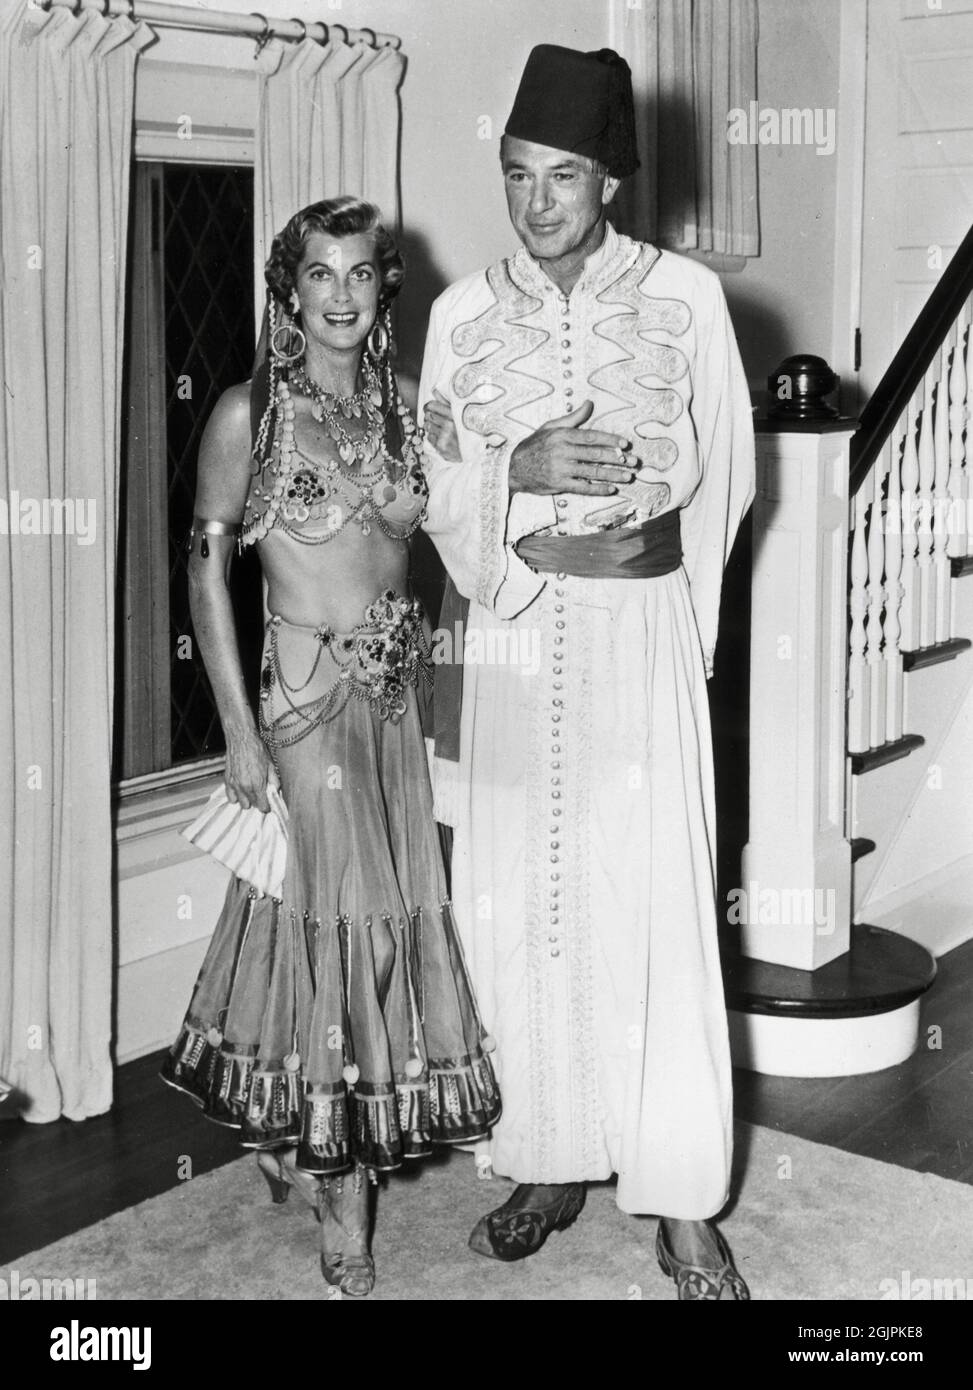 Gary Cooper in costume with his wife, Veronica Balfe, circa 1947 / File Reference # 34145-456THA Stock Photo